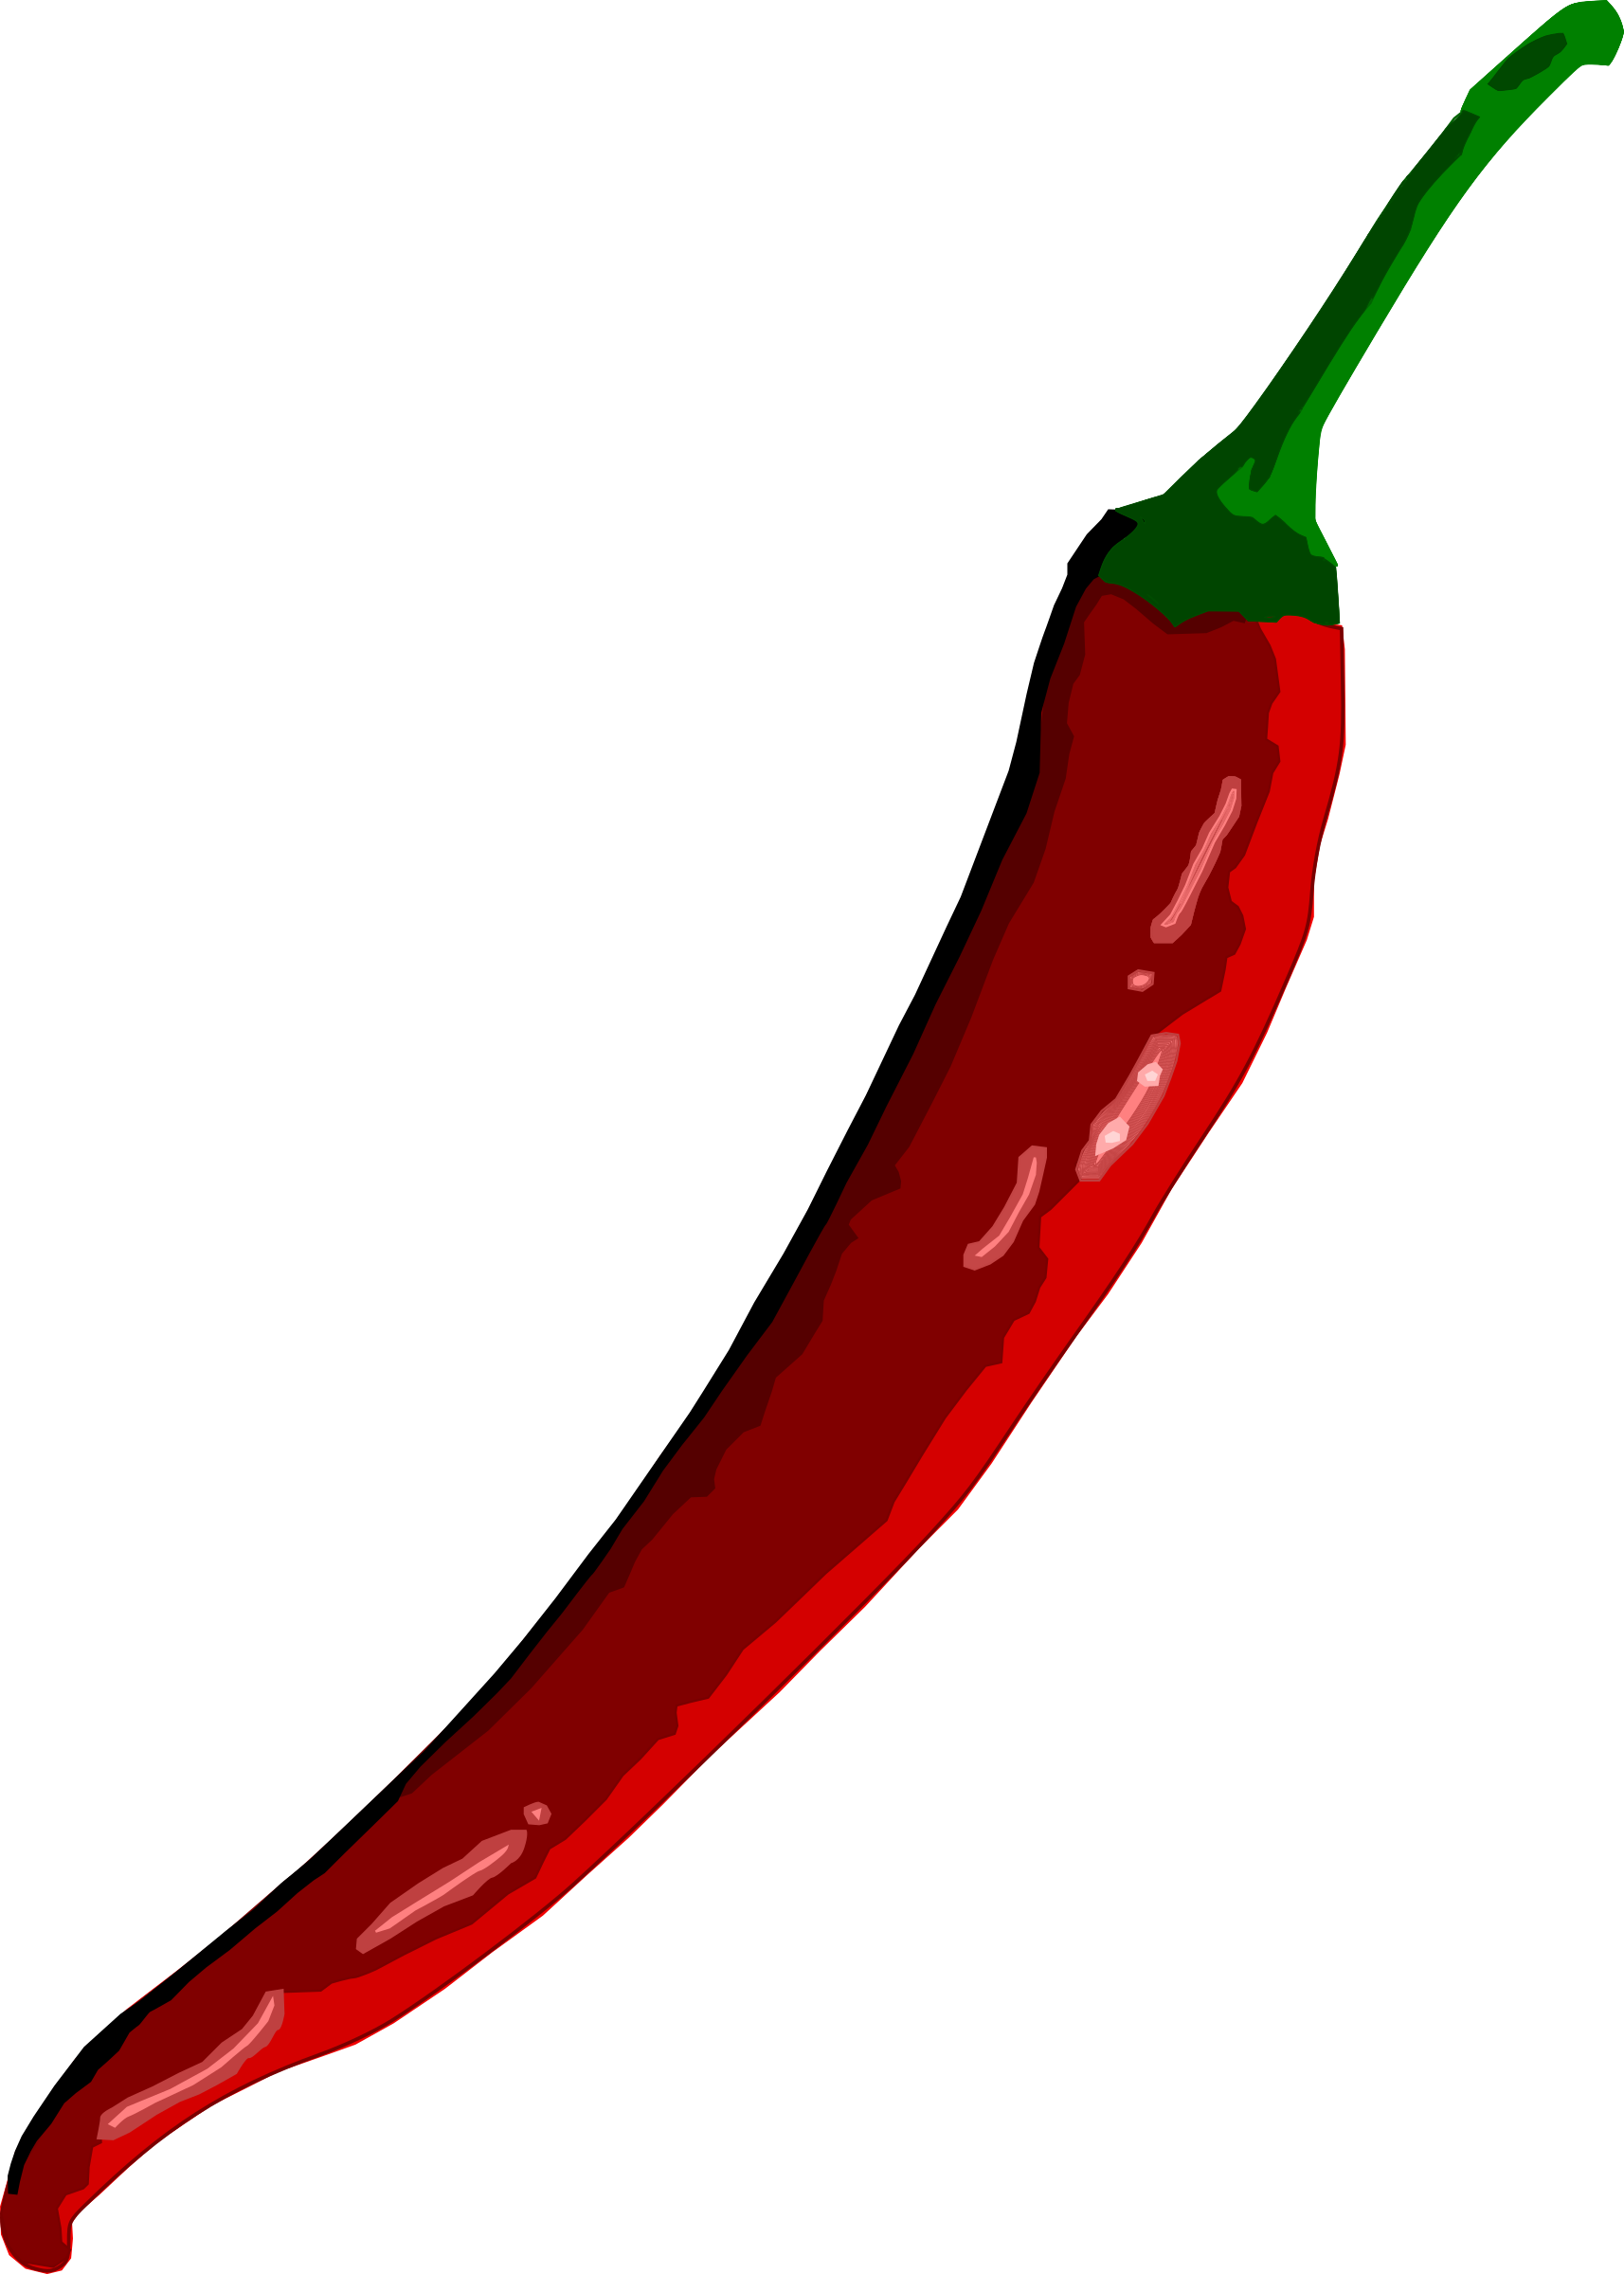 peppers clipart jalapeno